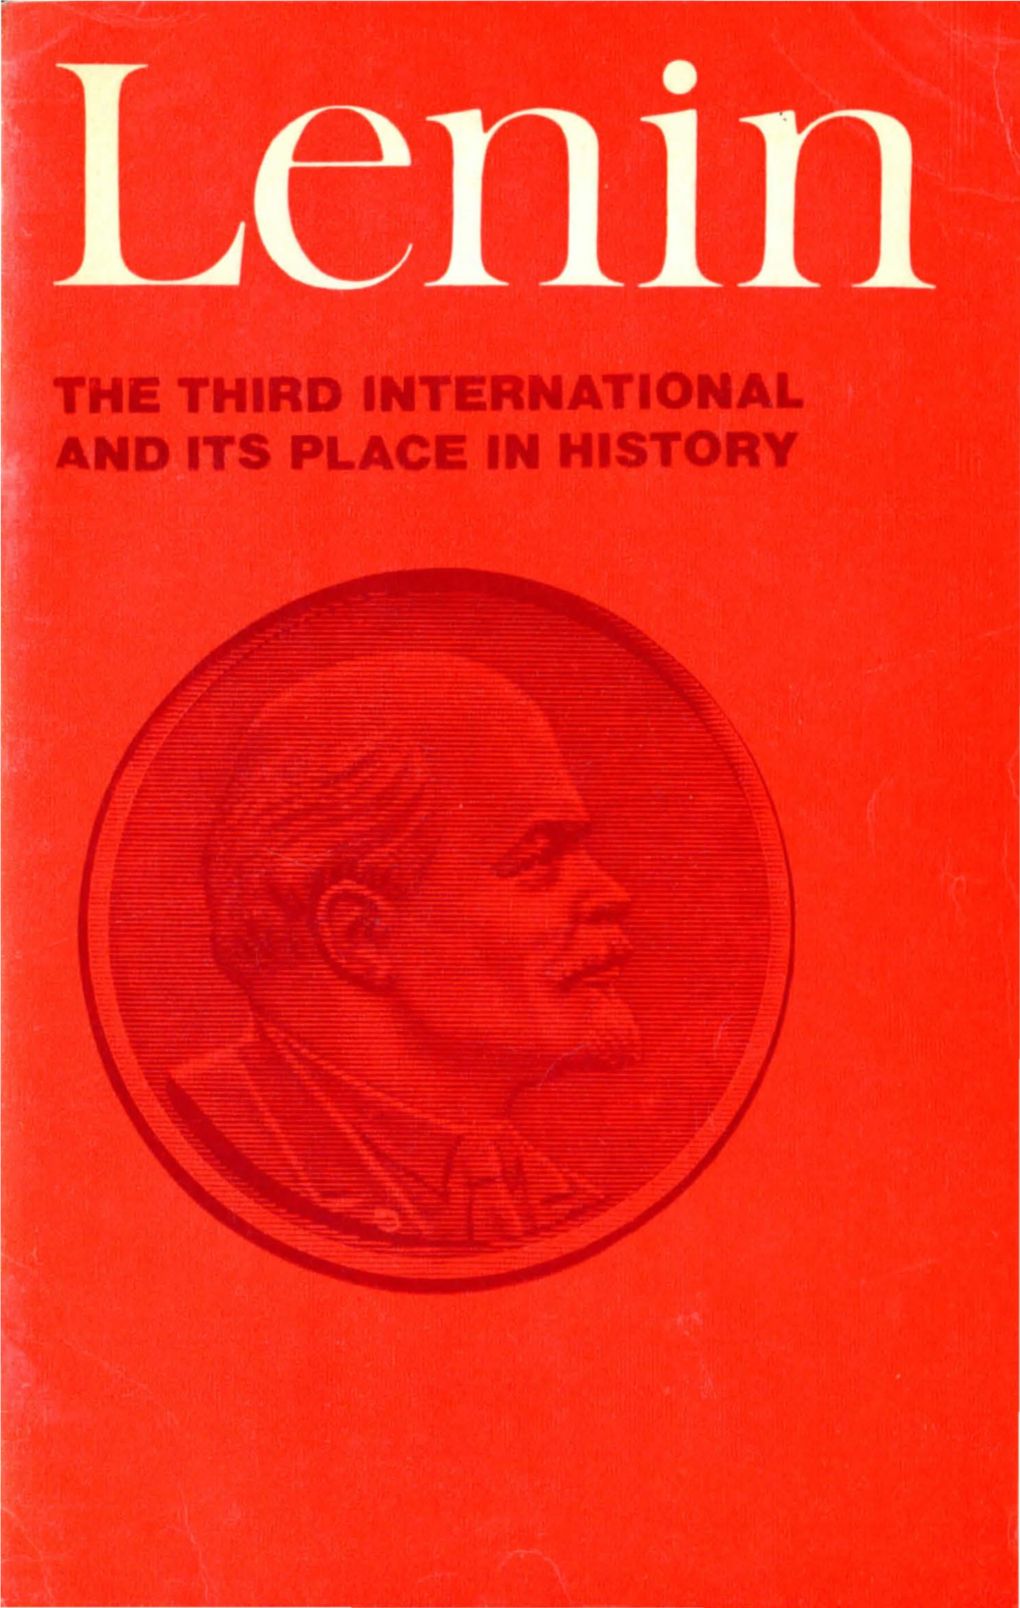 V. I. Lenin the Third International and Its Place